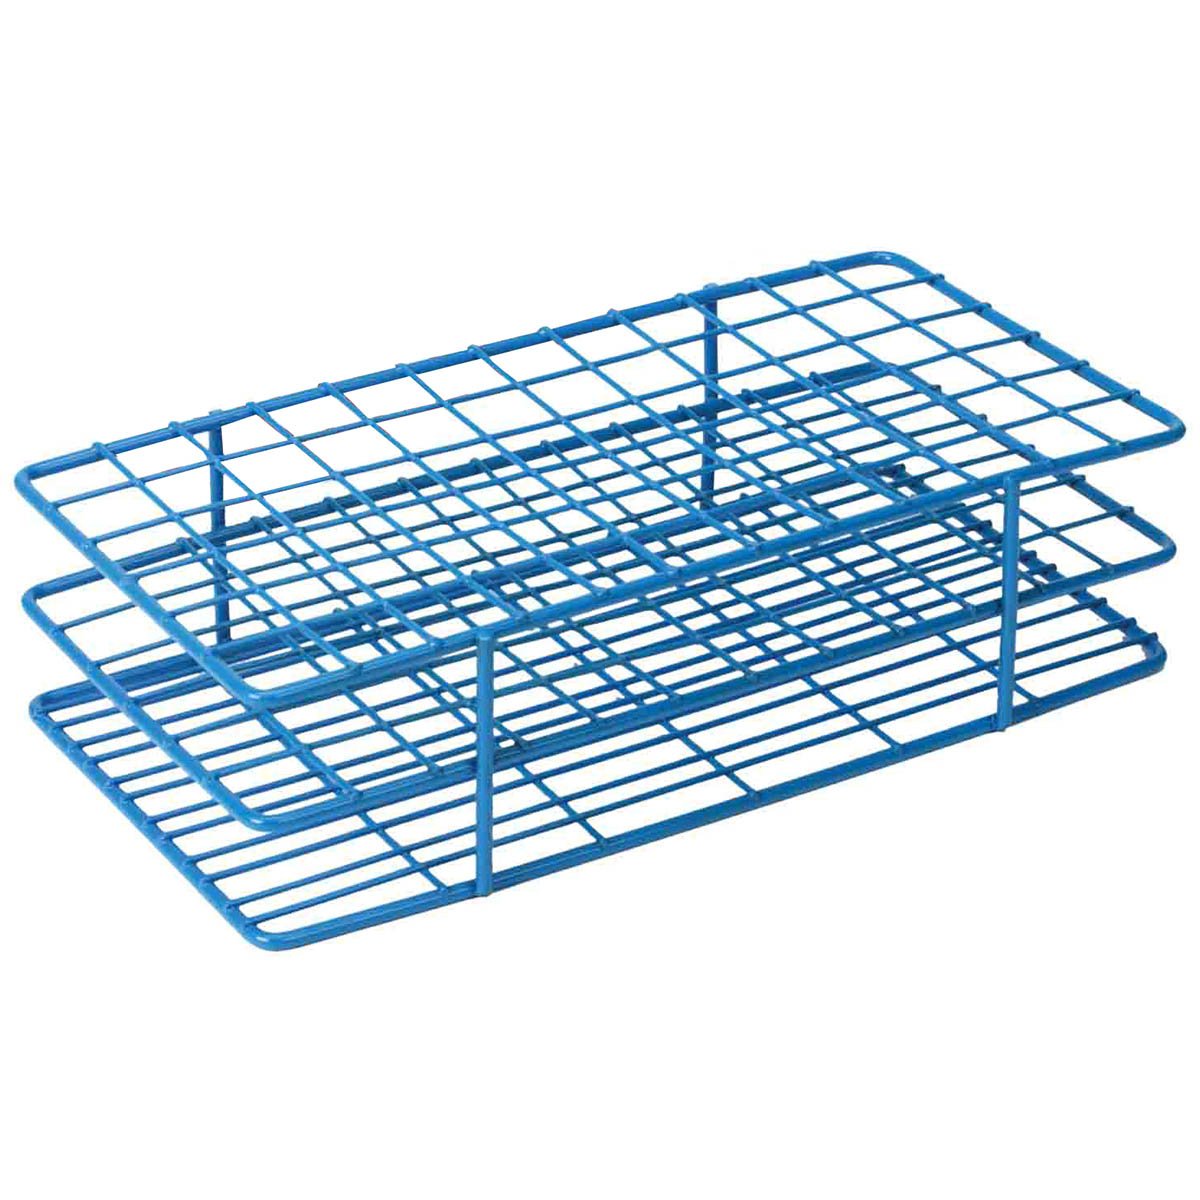 Coated Wire Rack - Fits 10-13mm Tubes, 72-Well, Blue